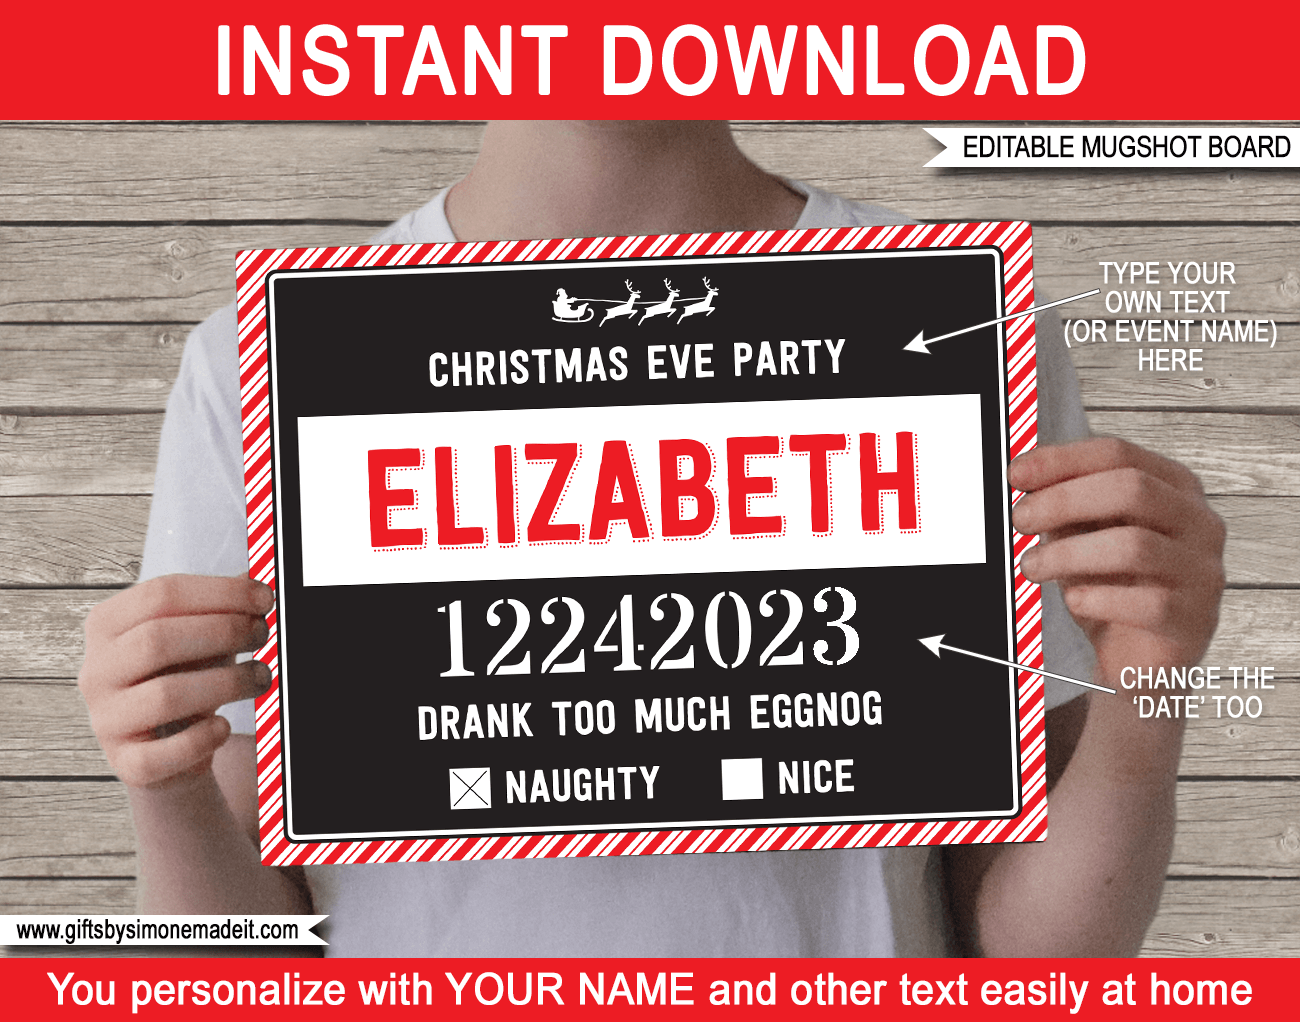 Printable Christmas Mugshot Sign Template | Xmas Party Photo Booth Props | DIY Editable Text | Instant Download via giftsbysimonemadeit.com